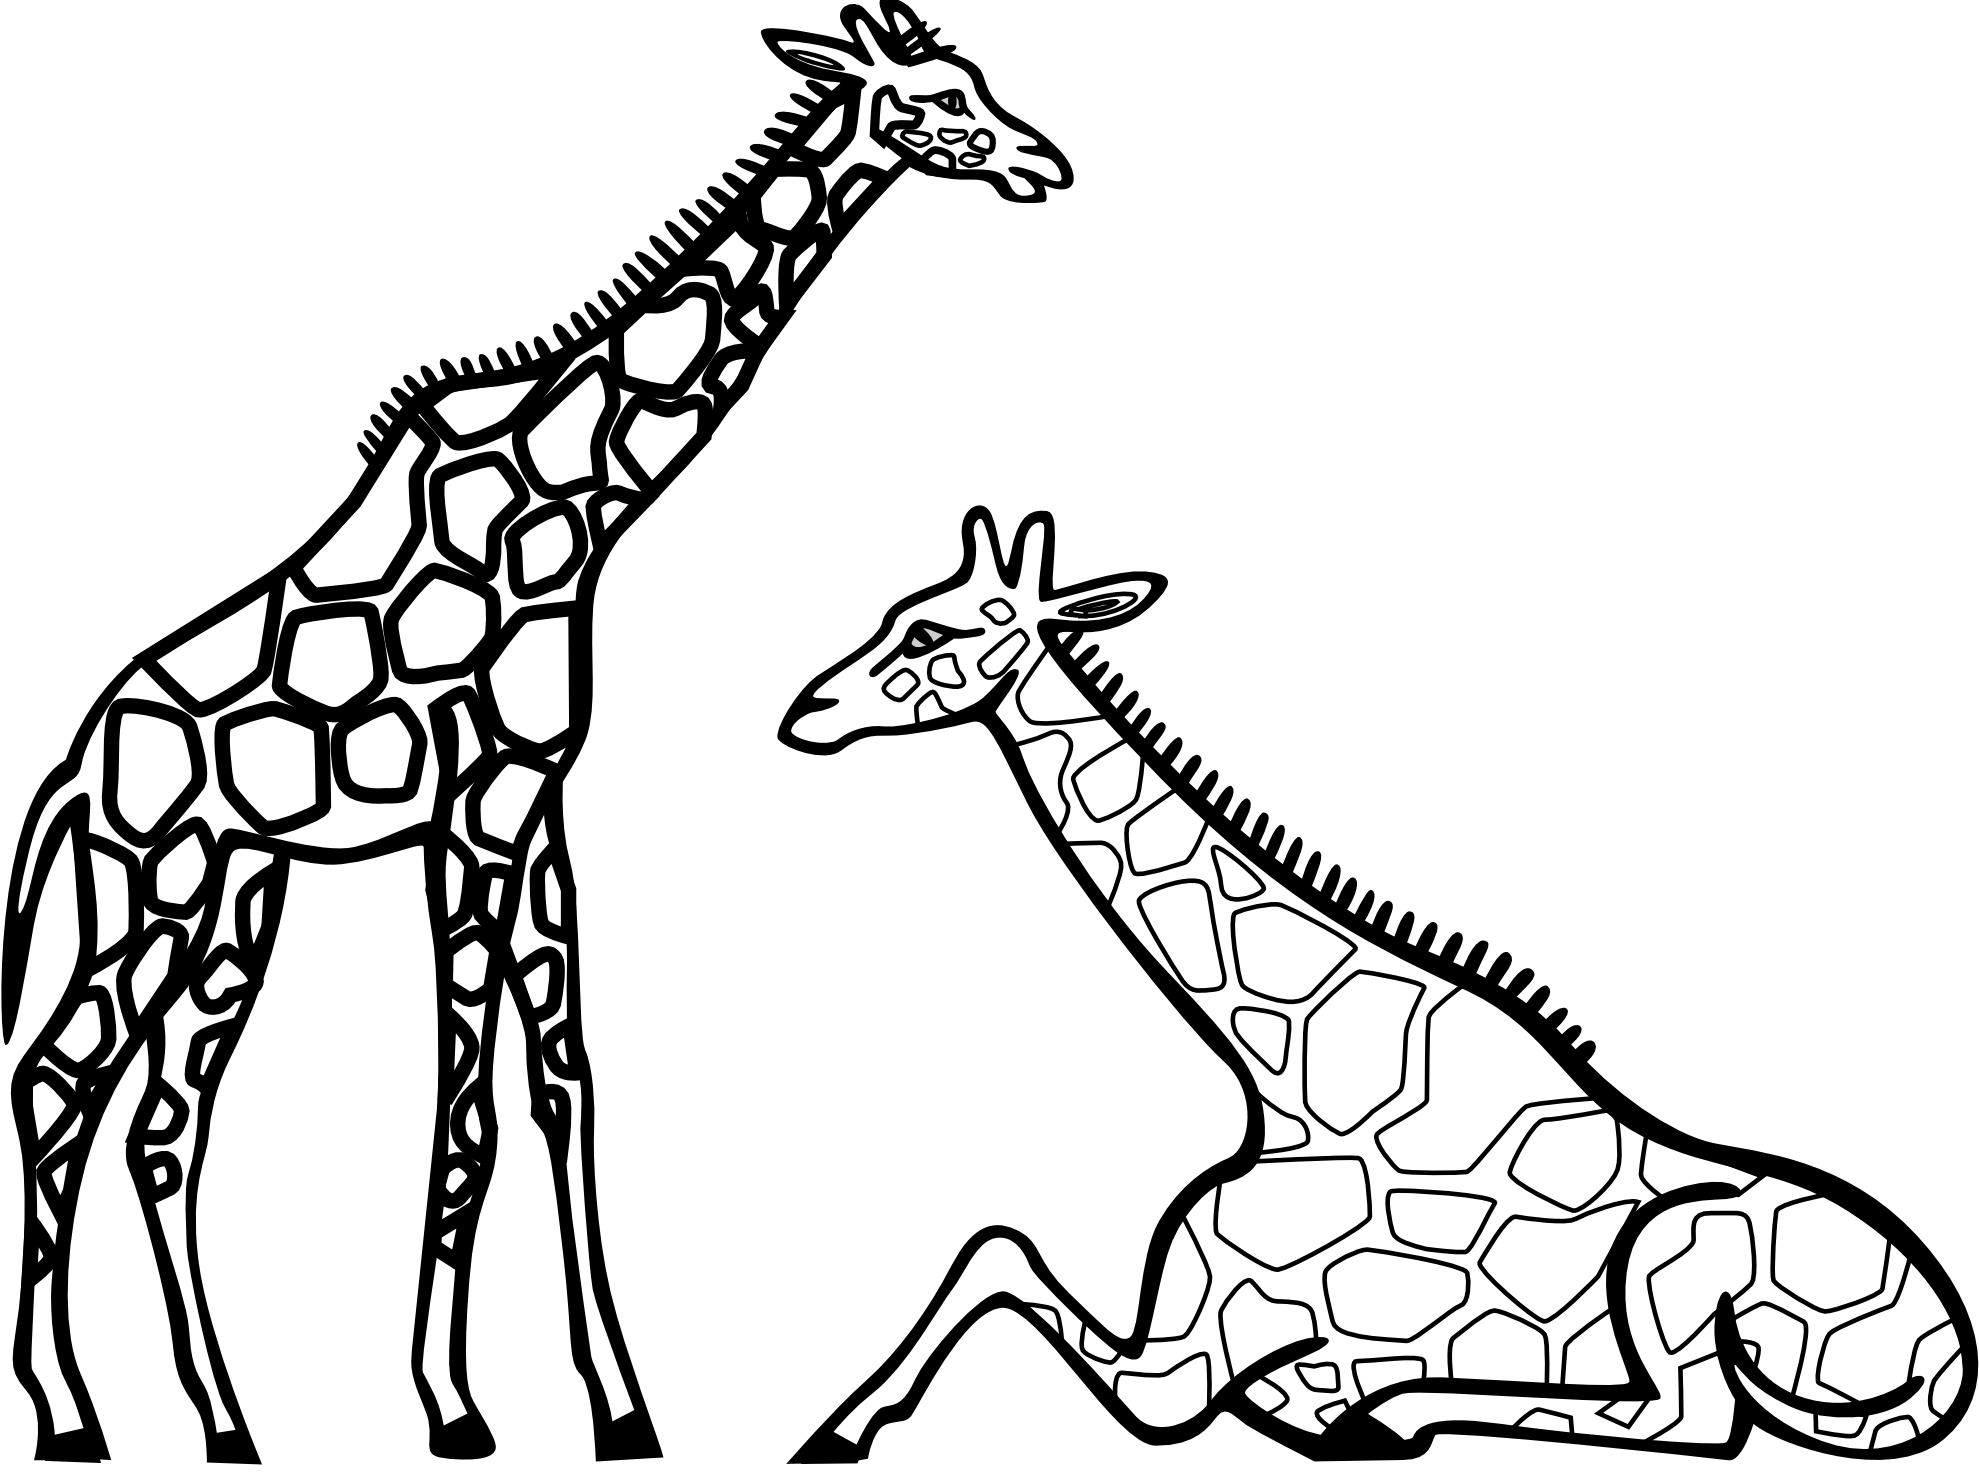 Giraffe Black And White Clipart Images  Pictures - Becuo